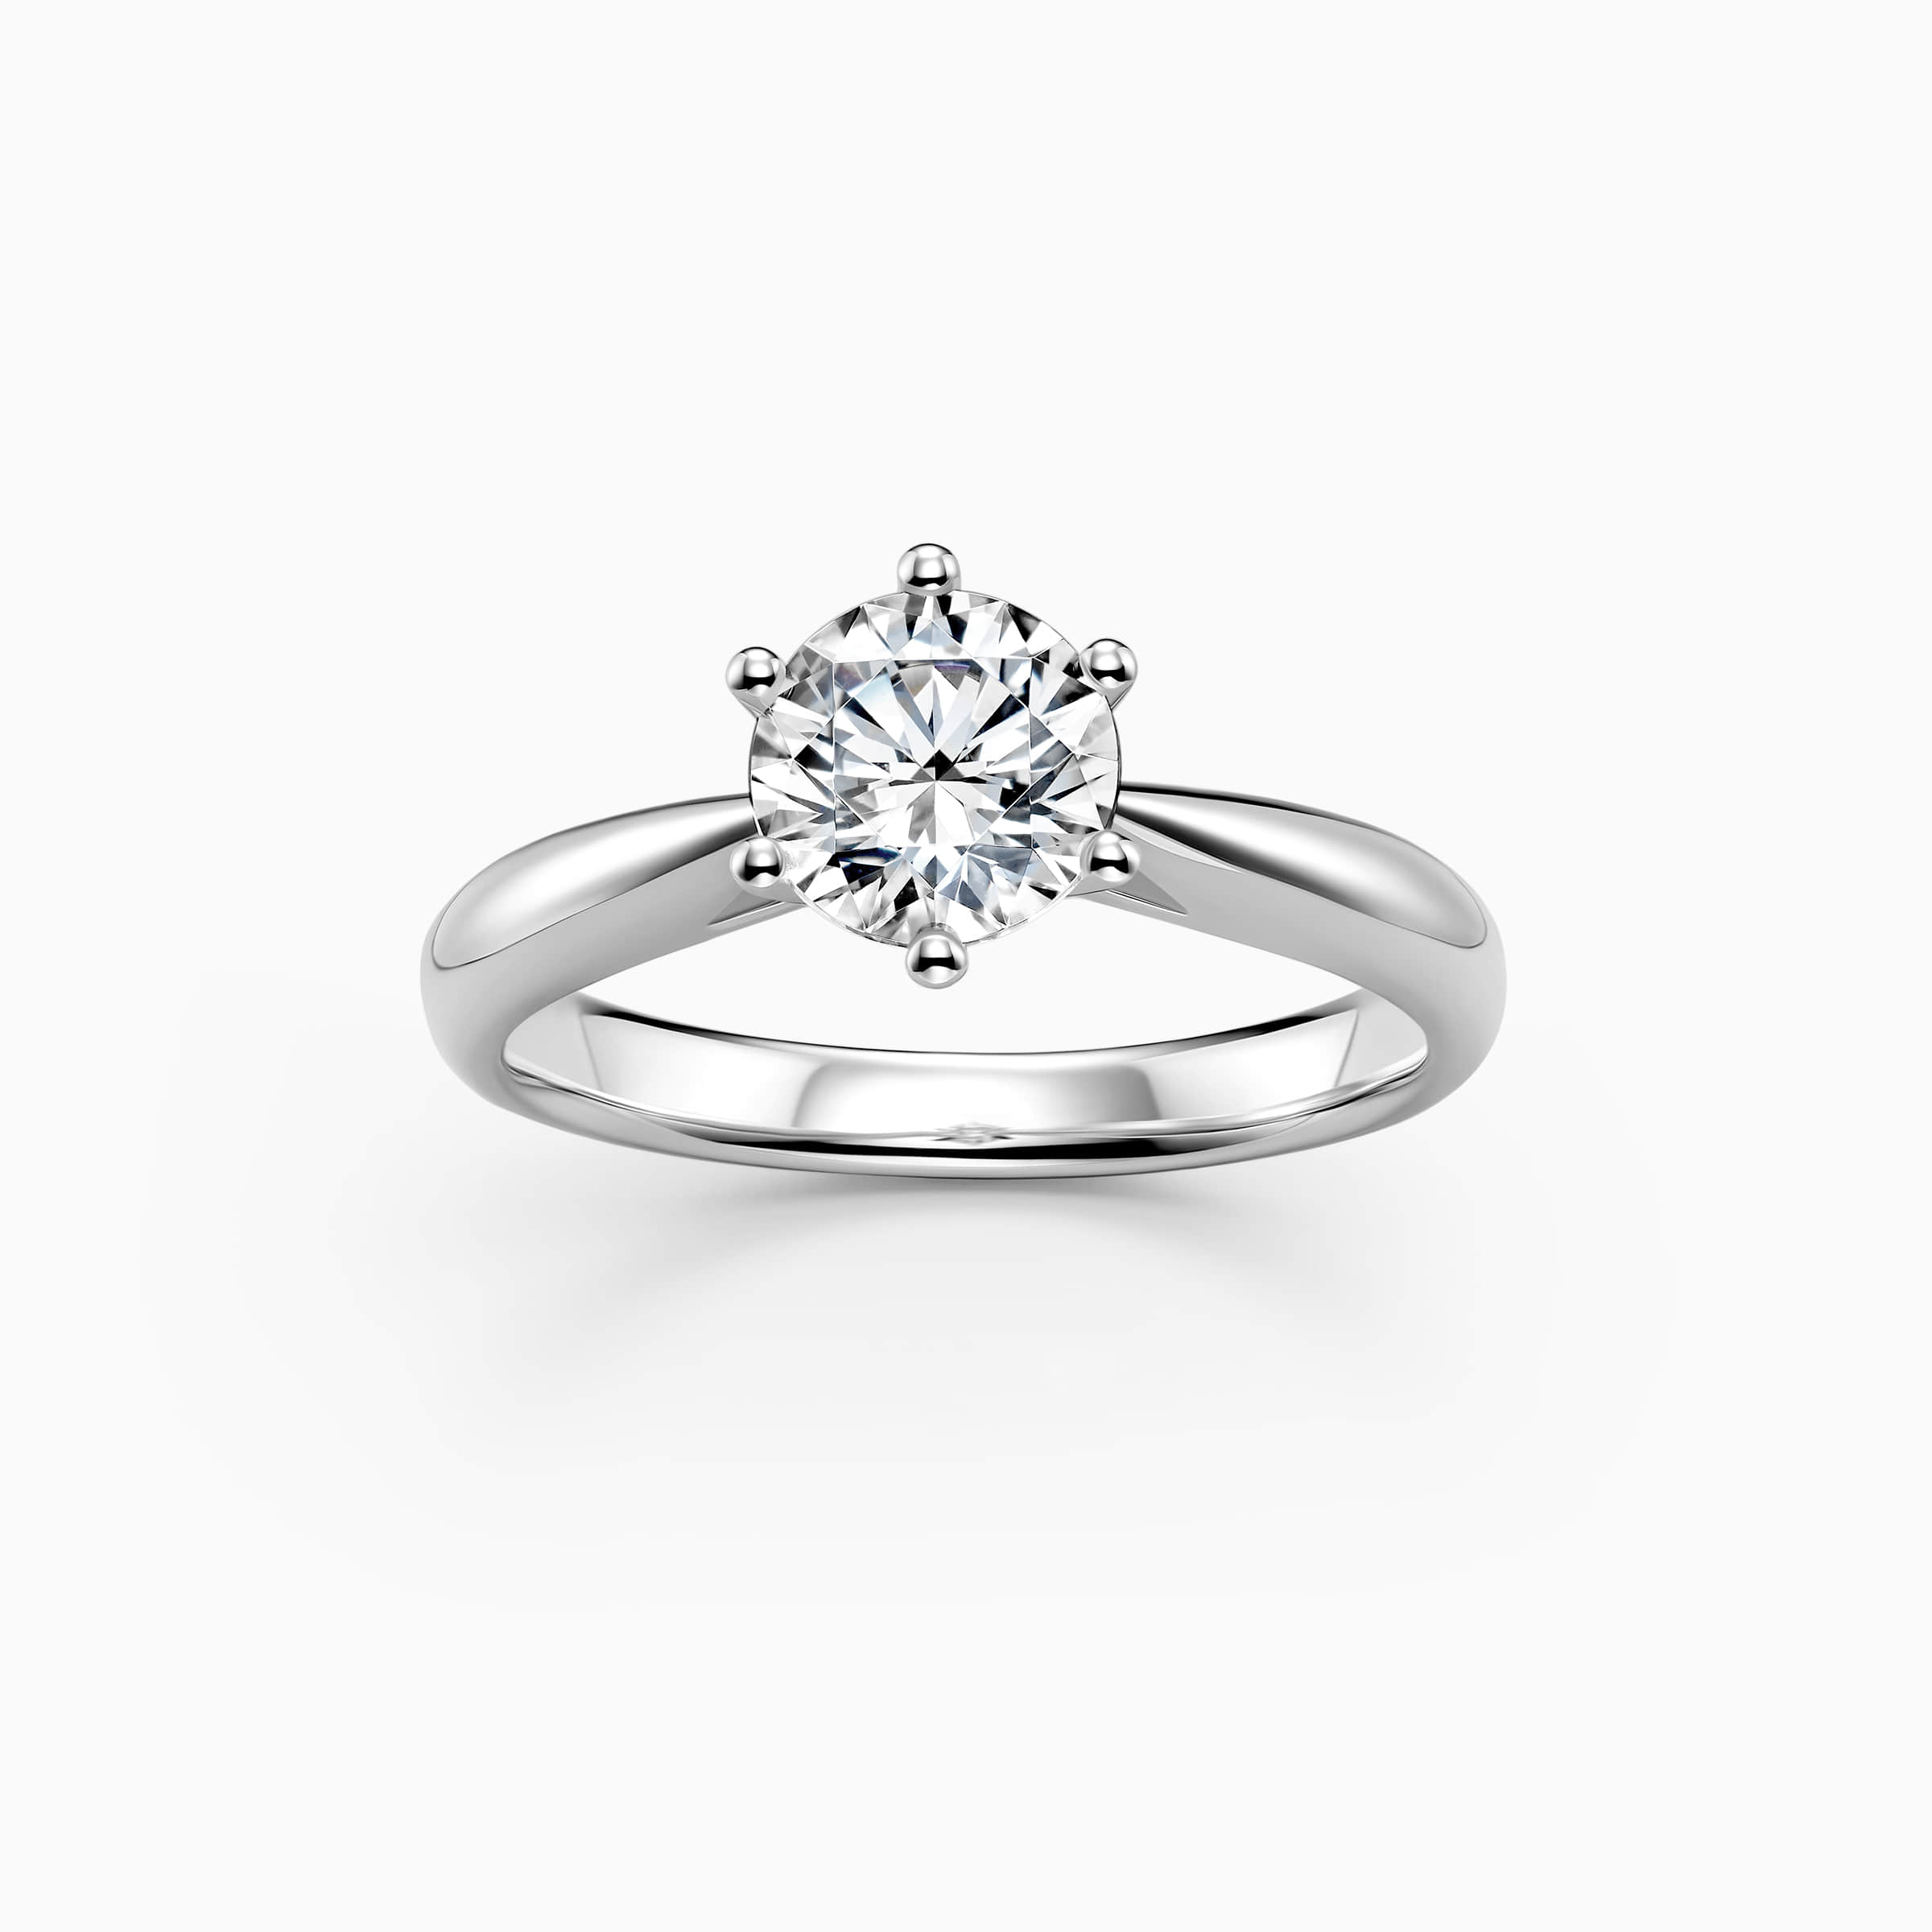 Darry Ring 6 prong promise ring in white gold